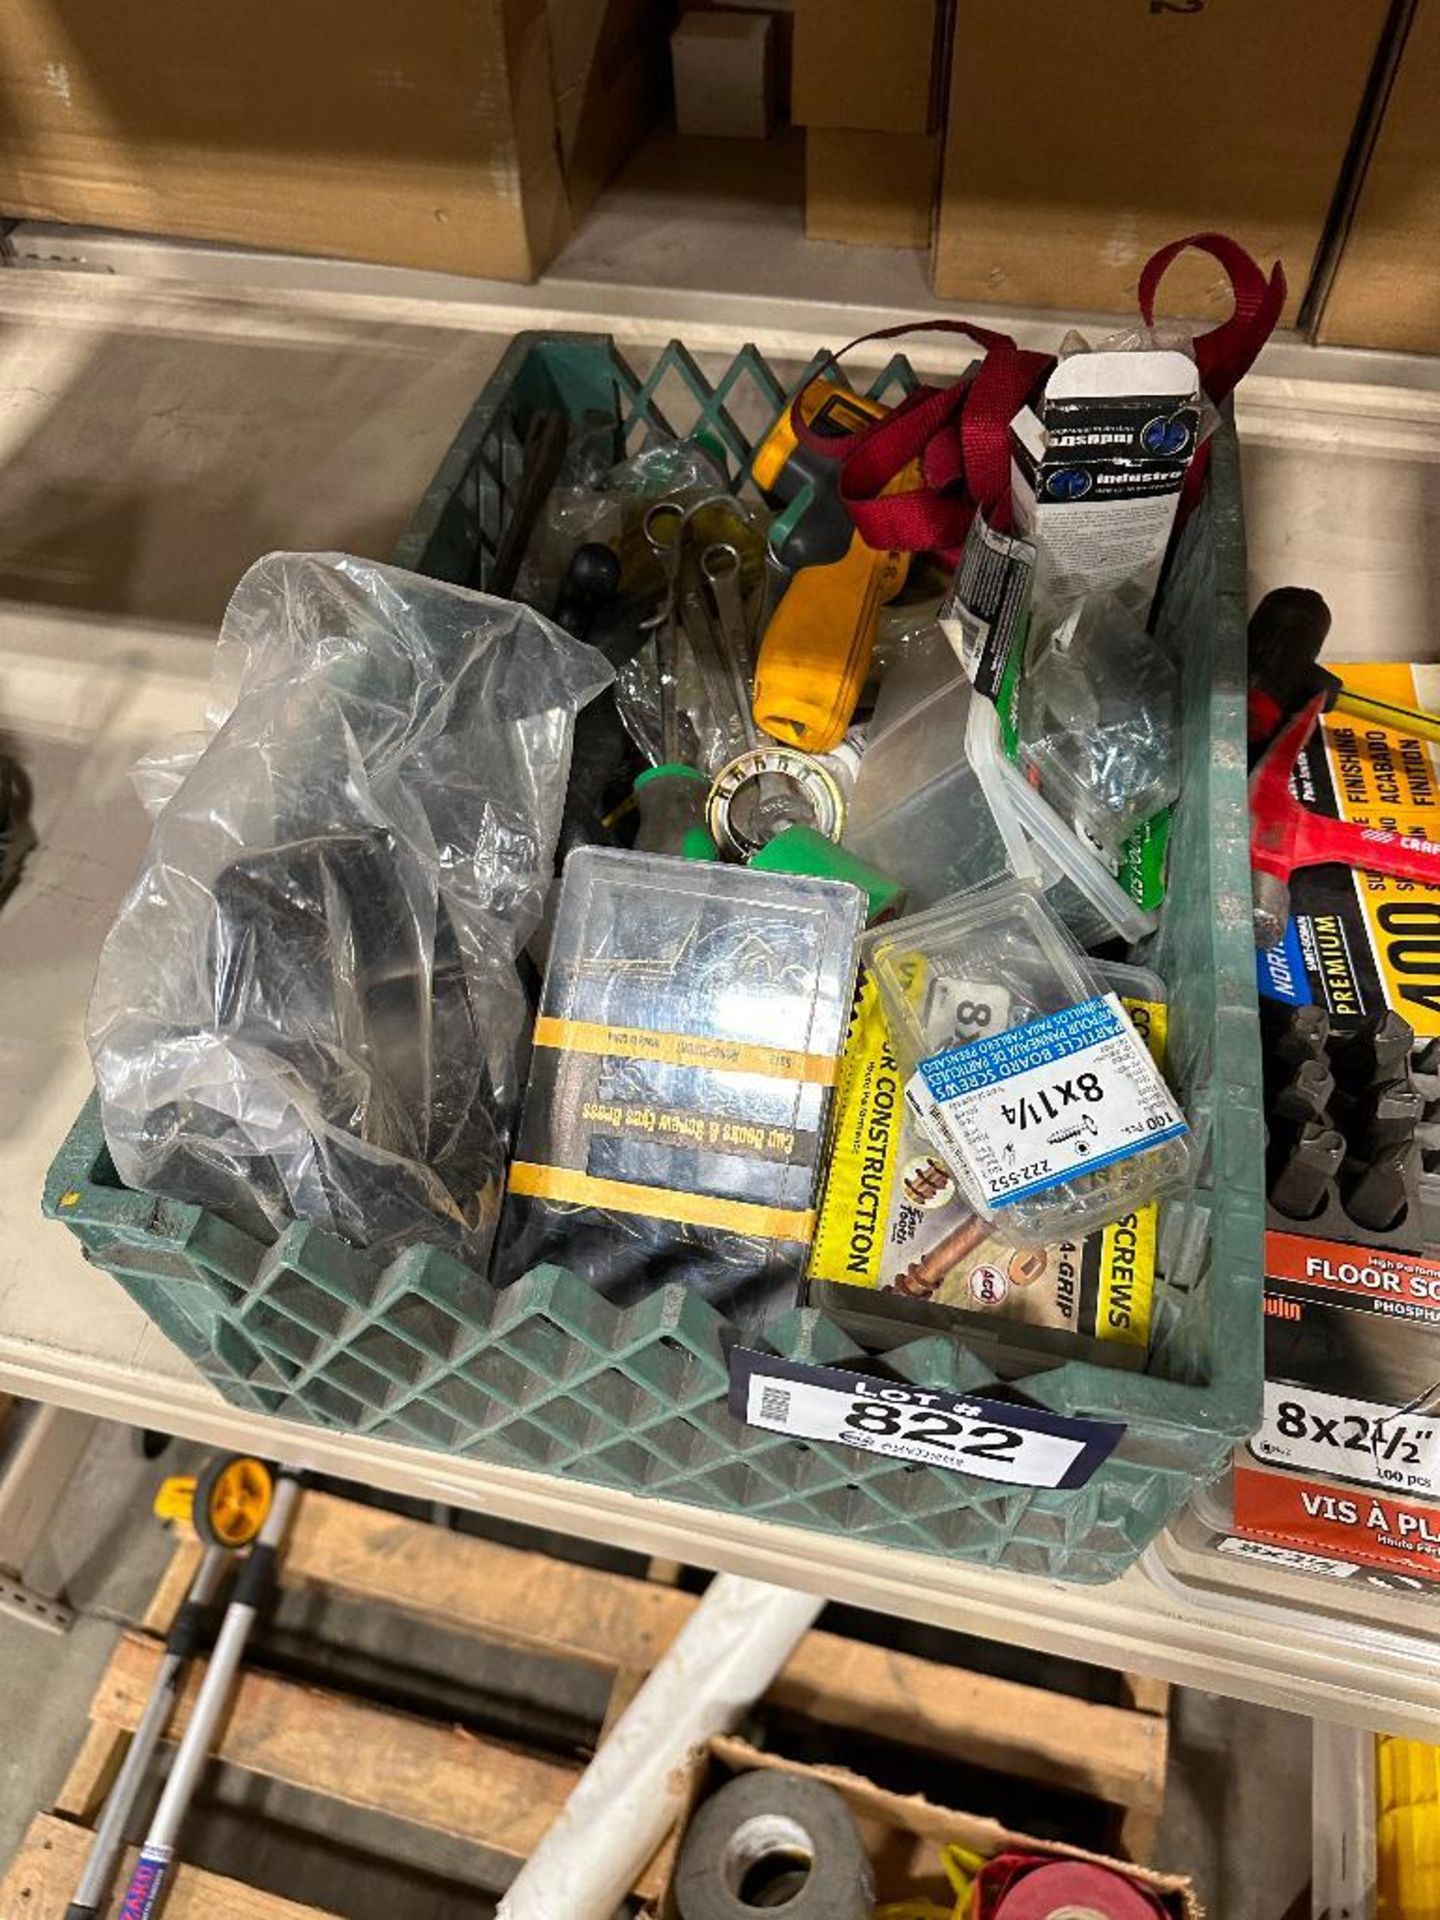 Lot of Asst. Fasteners, Hammers, Wrenches, Stamps, Sand Paper, etc. - Image 3 of 3